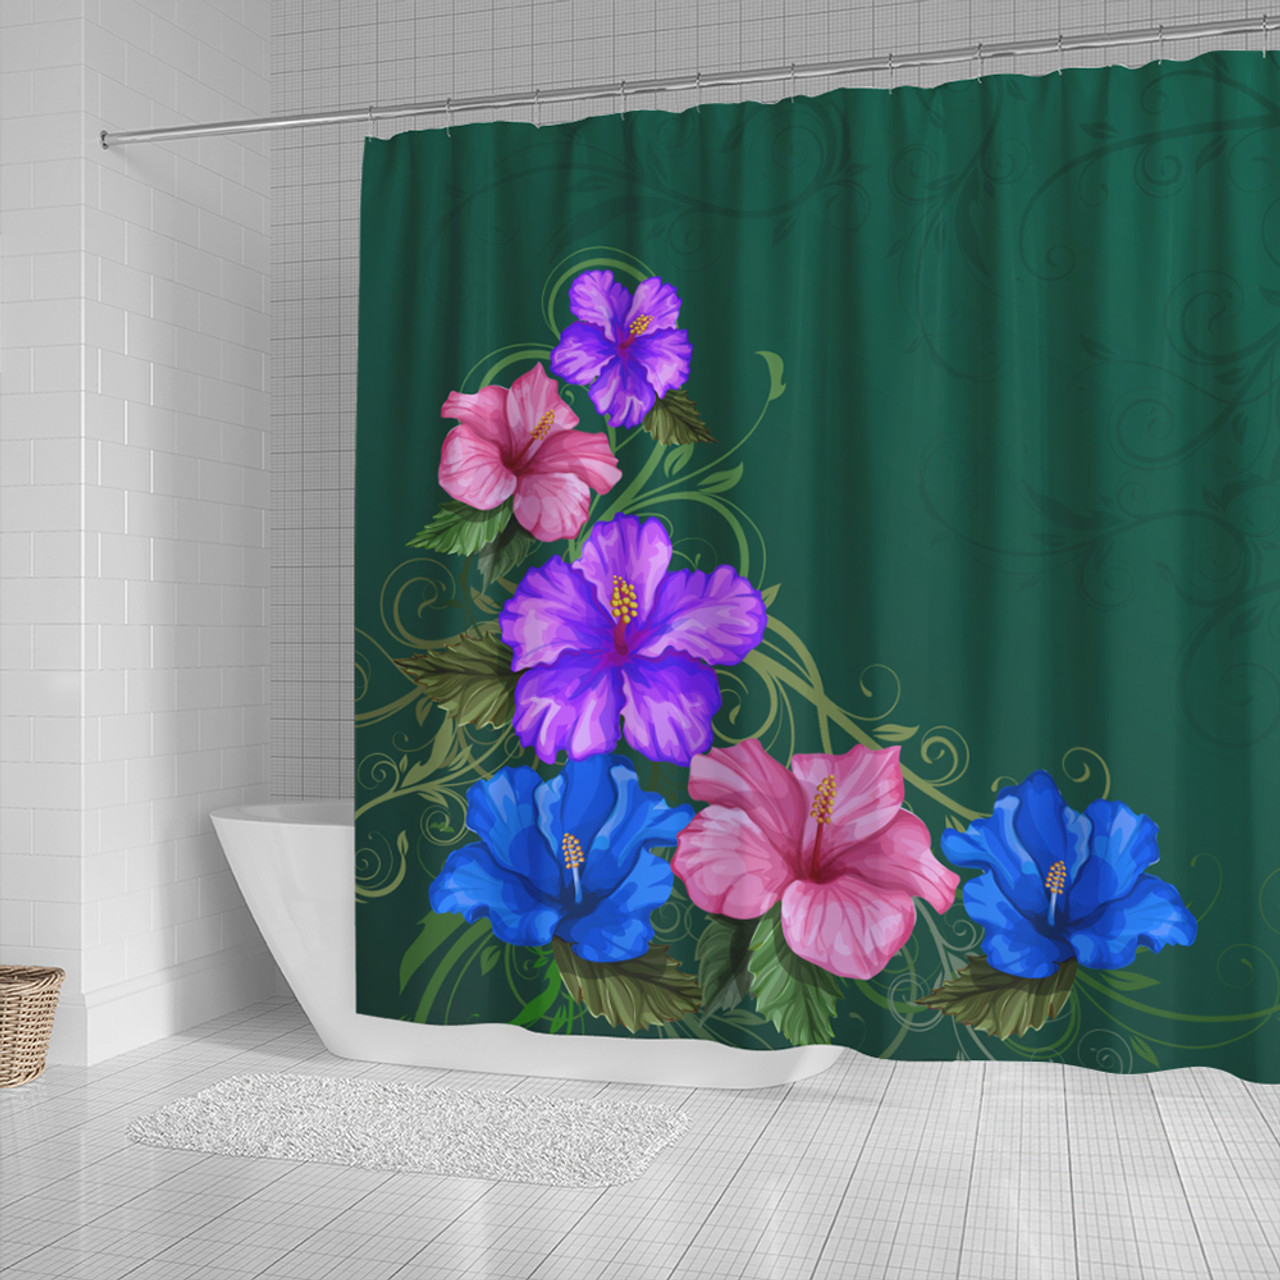 Hawaii Shower Curtain Hibiscus More Colorful